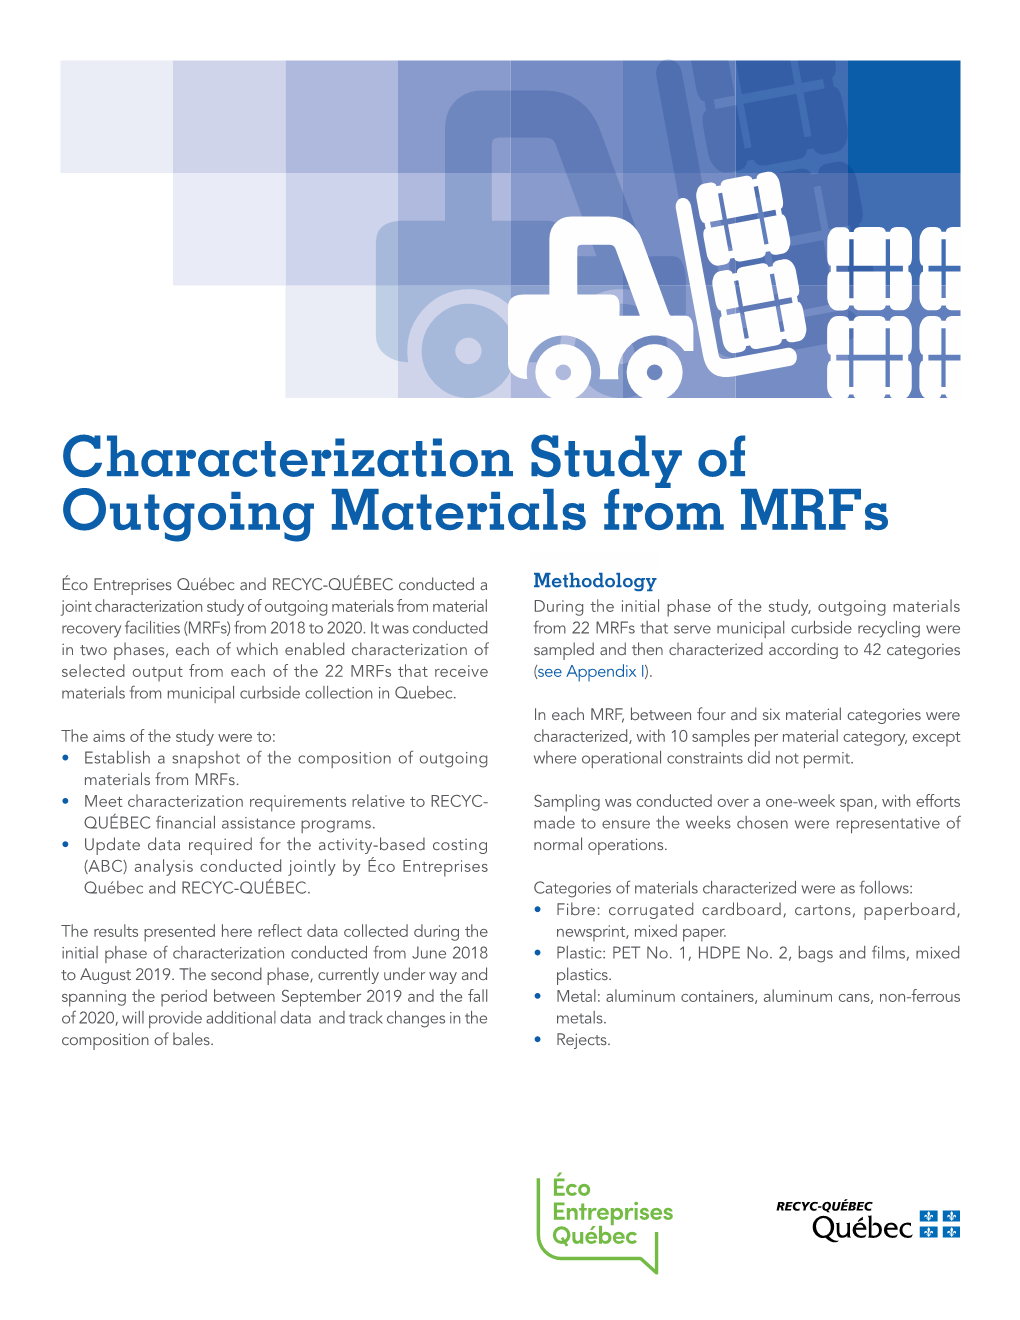 Characterization Study of Outgoing Materials from Mrfs